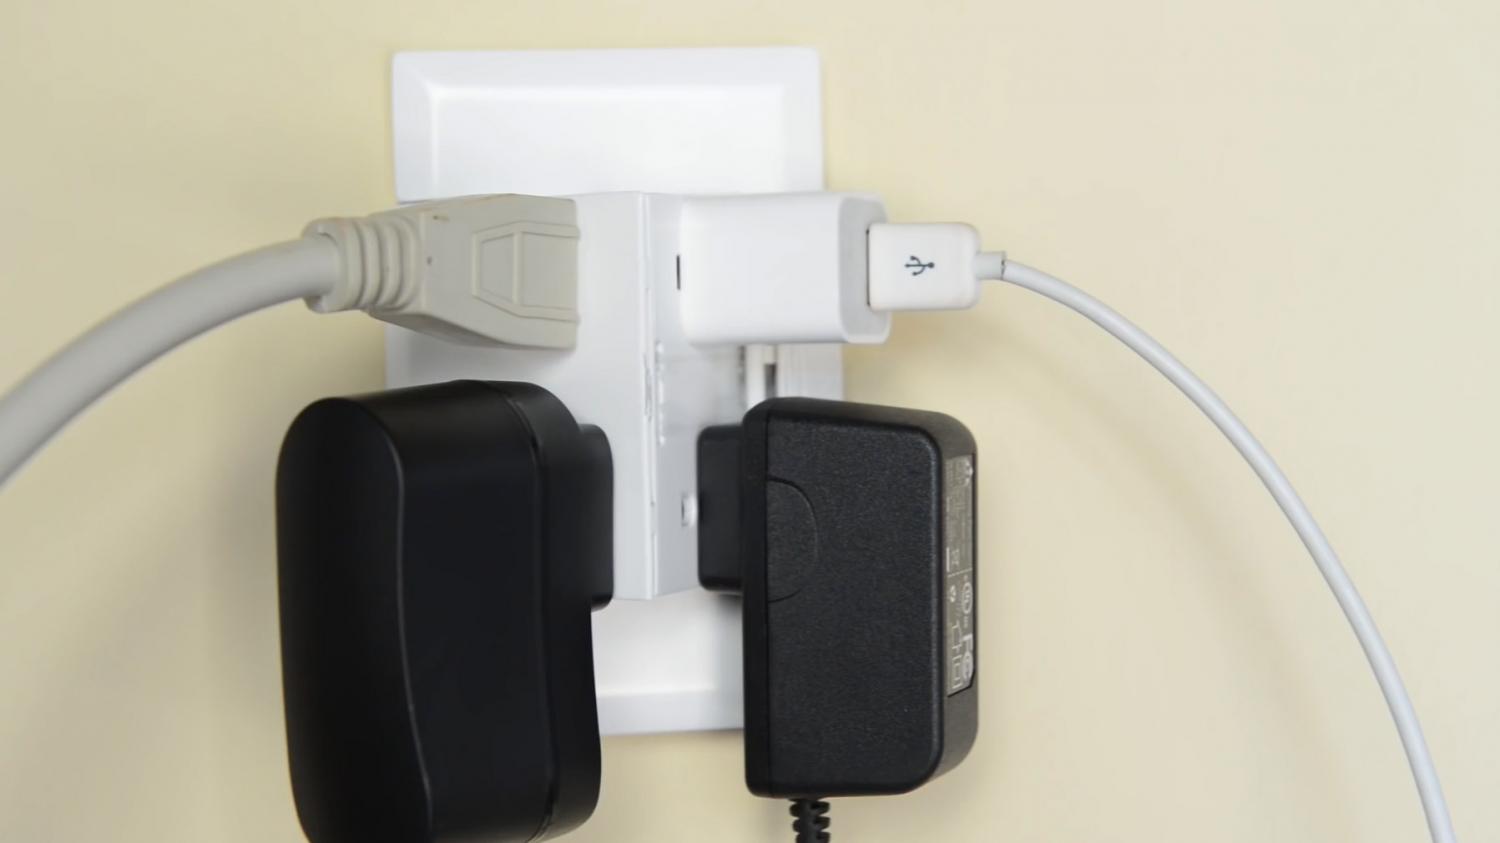 Pop-Out Outlets Double The Number Of Things You Can Plug In - THEOUTLET smart pop-outlets